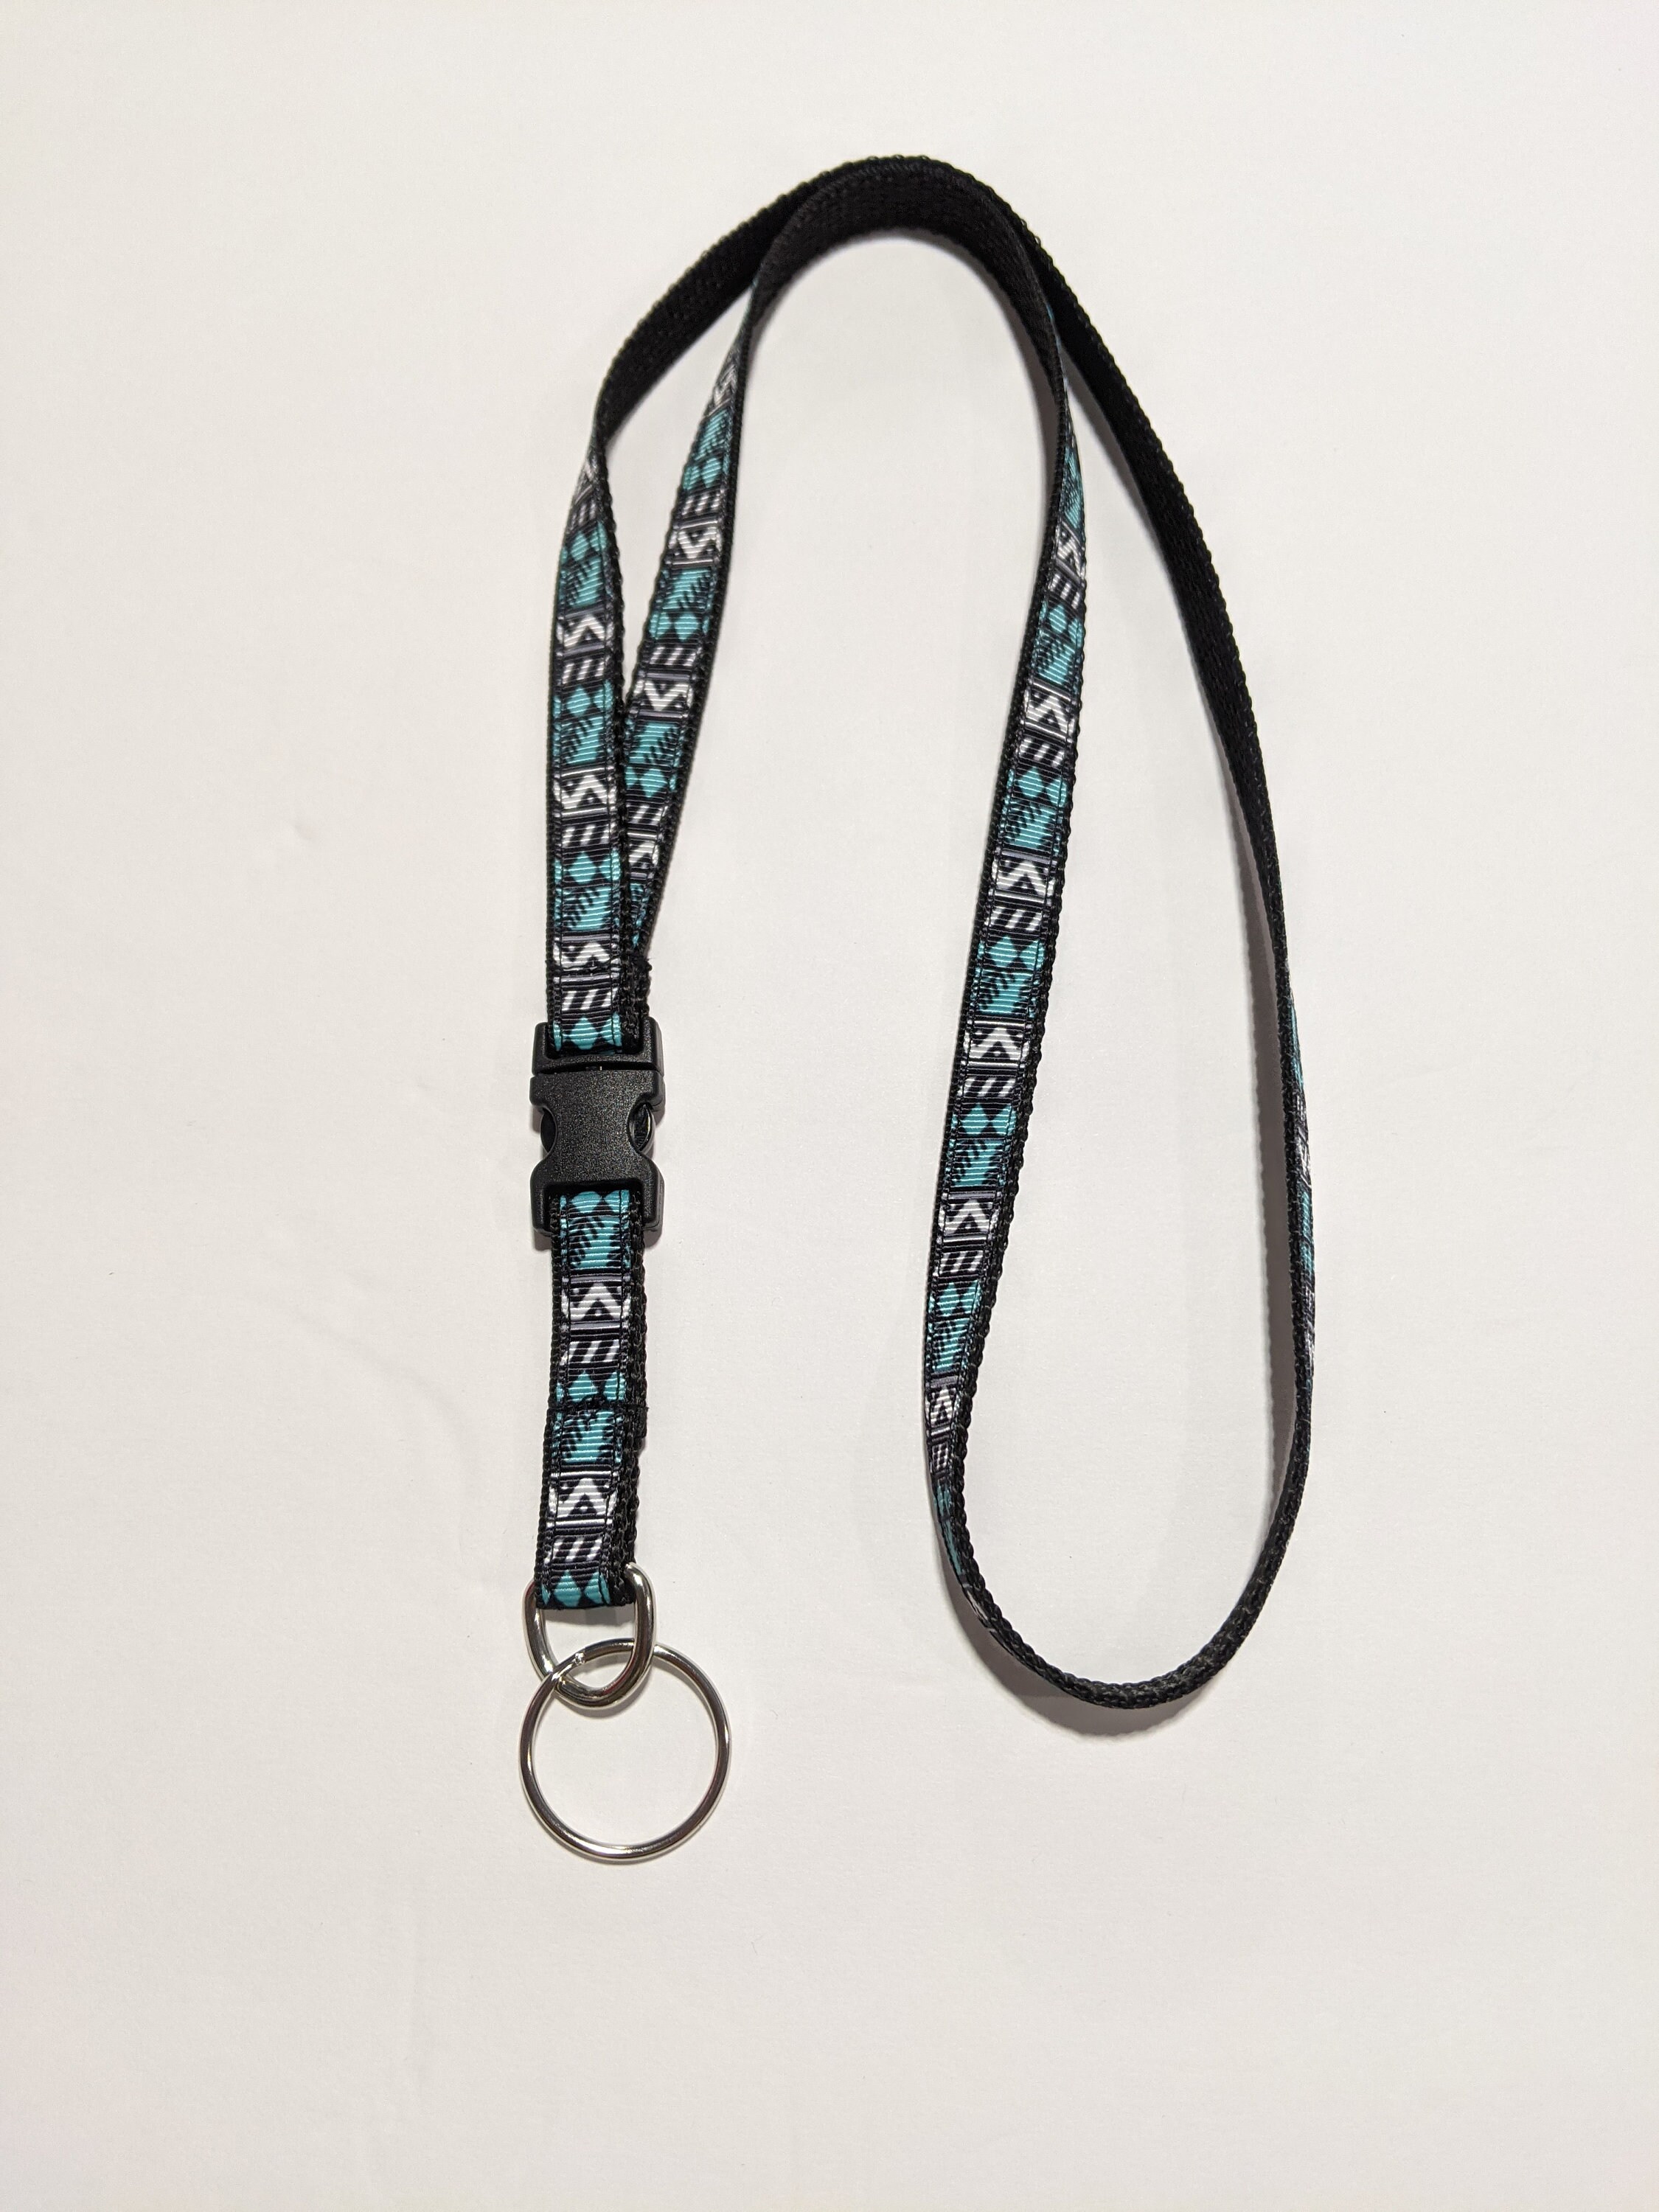 1/2 Wide Teal and Black Southwest Aztec Lanyard with | Etsy